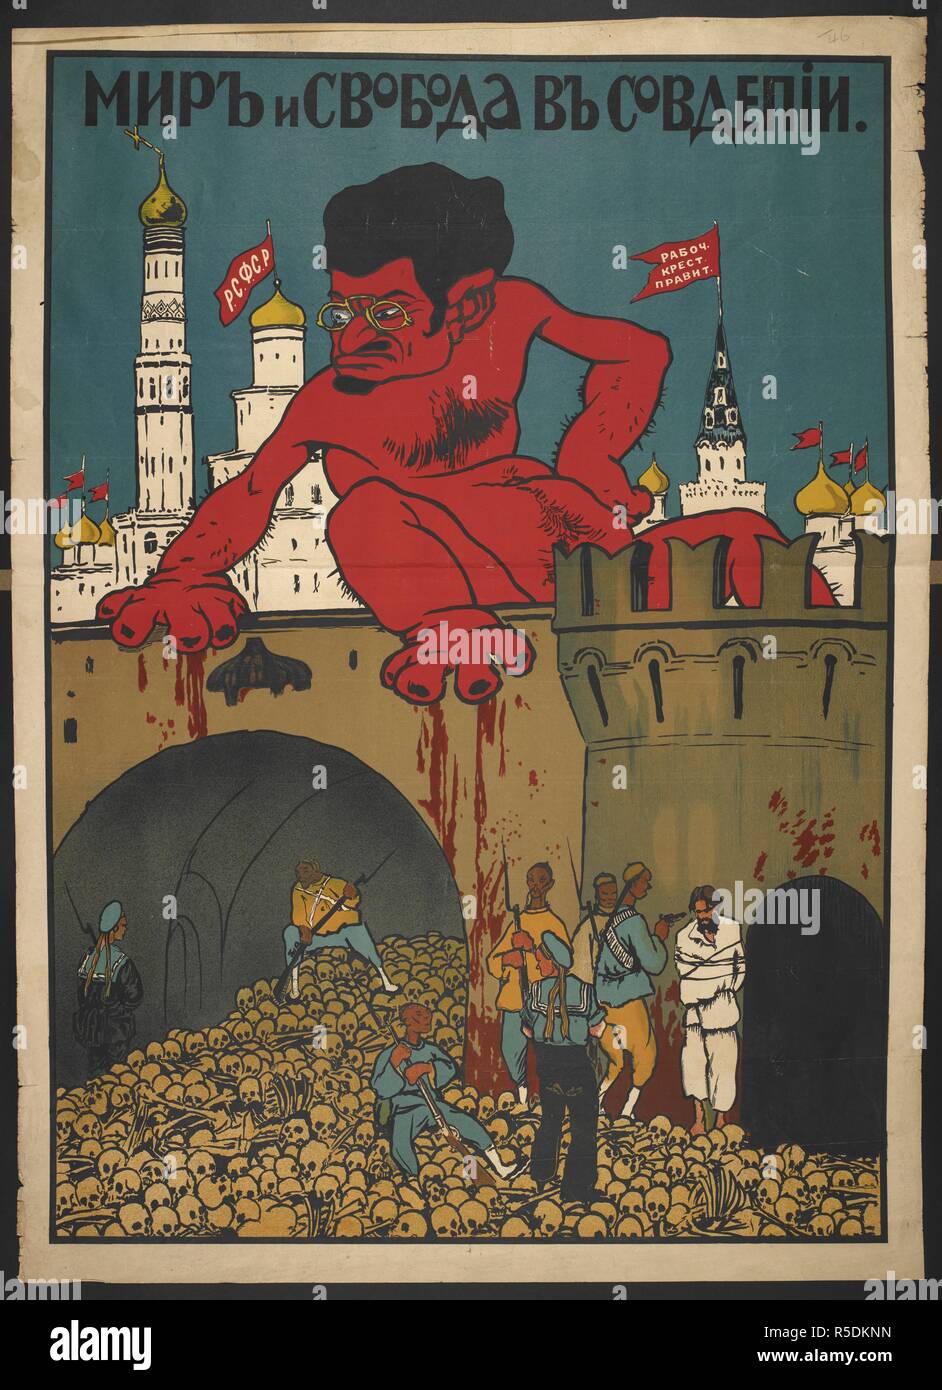 A Cartoon Against Trotsky And The Red Army Dœd N Ns D N D D D D D D D Ns D D D D Dµd N D Peace And Freedom In Soviet Russia 1920 Source 1856 G 2 46 Stock Photo Alamy